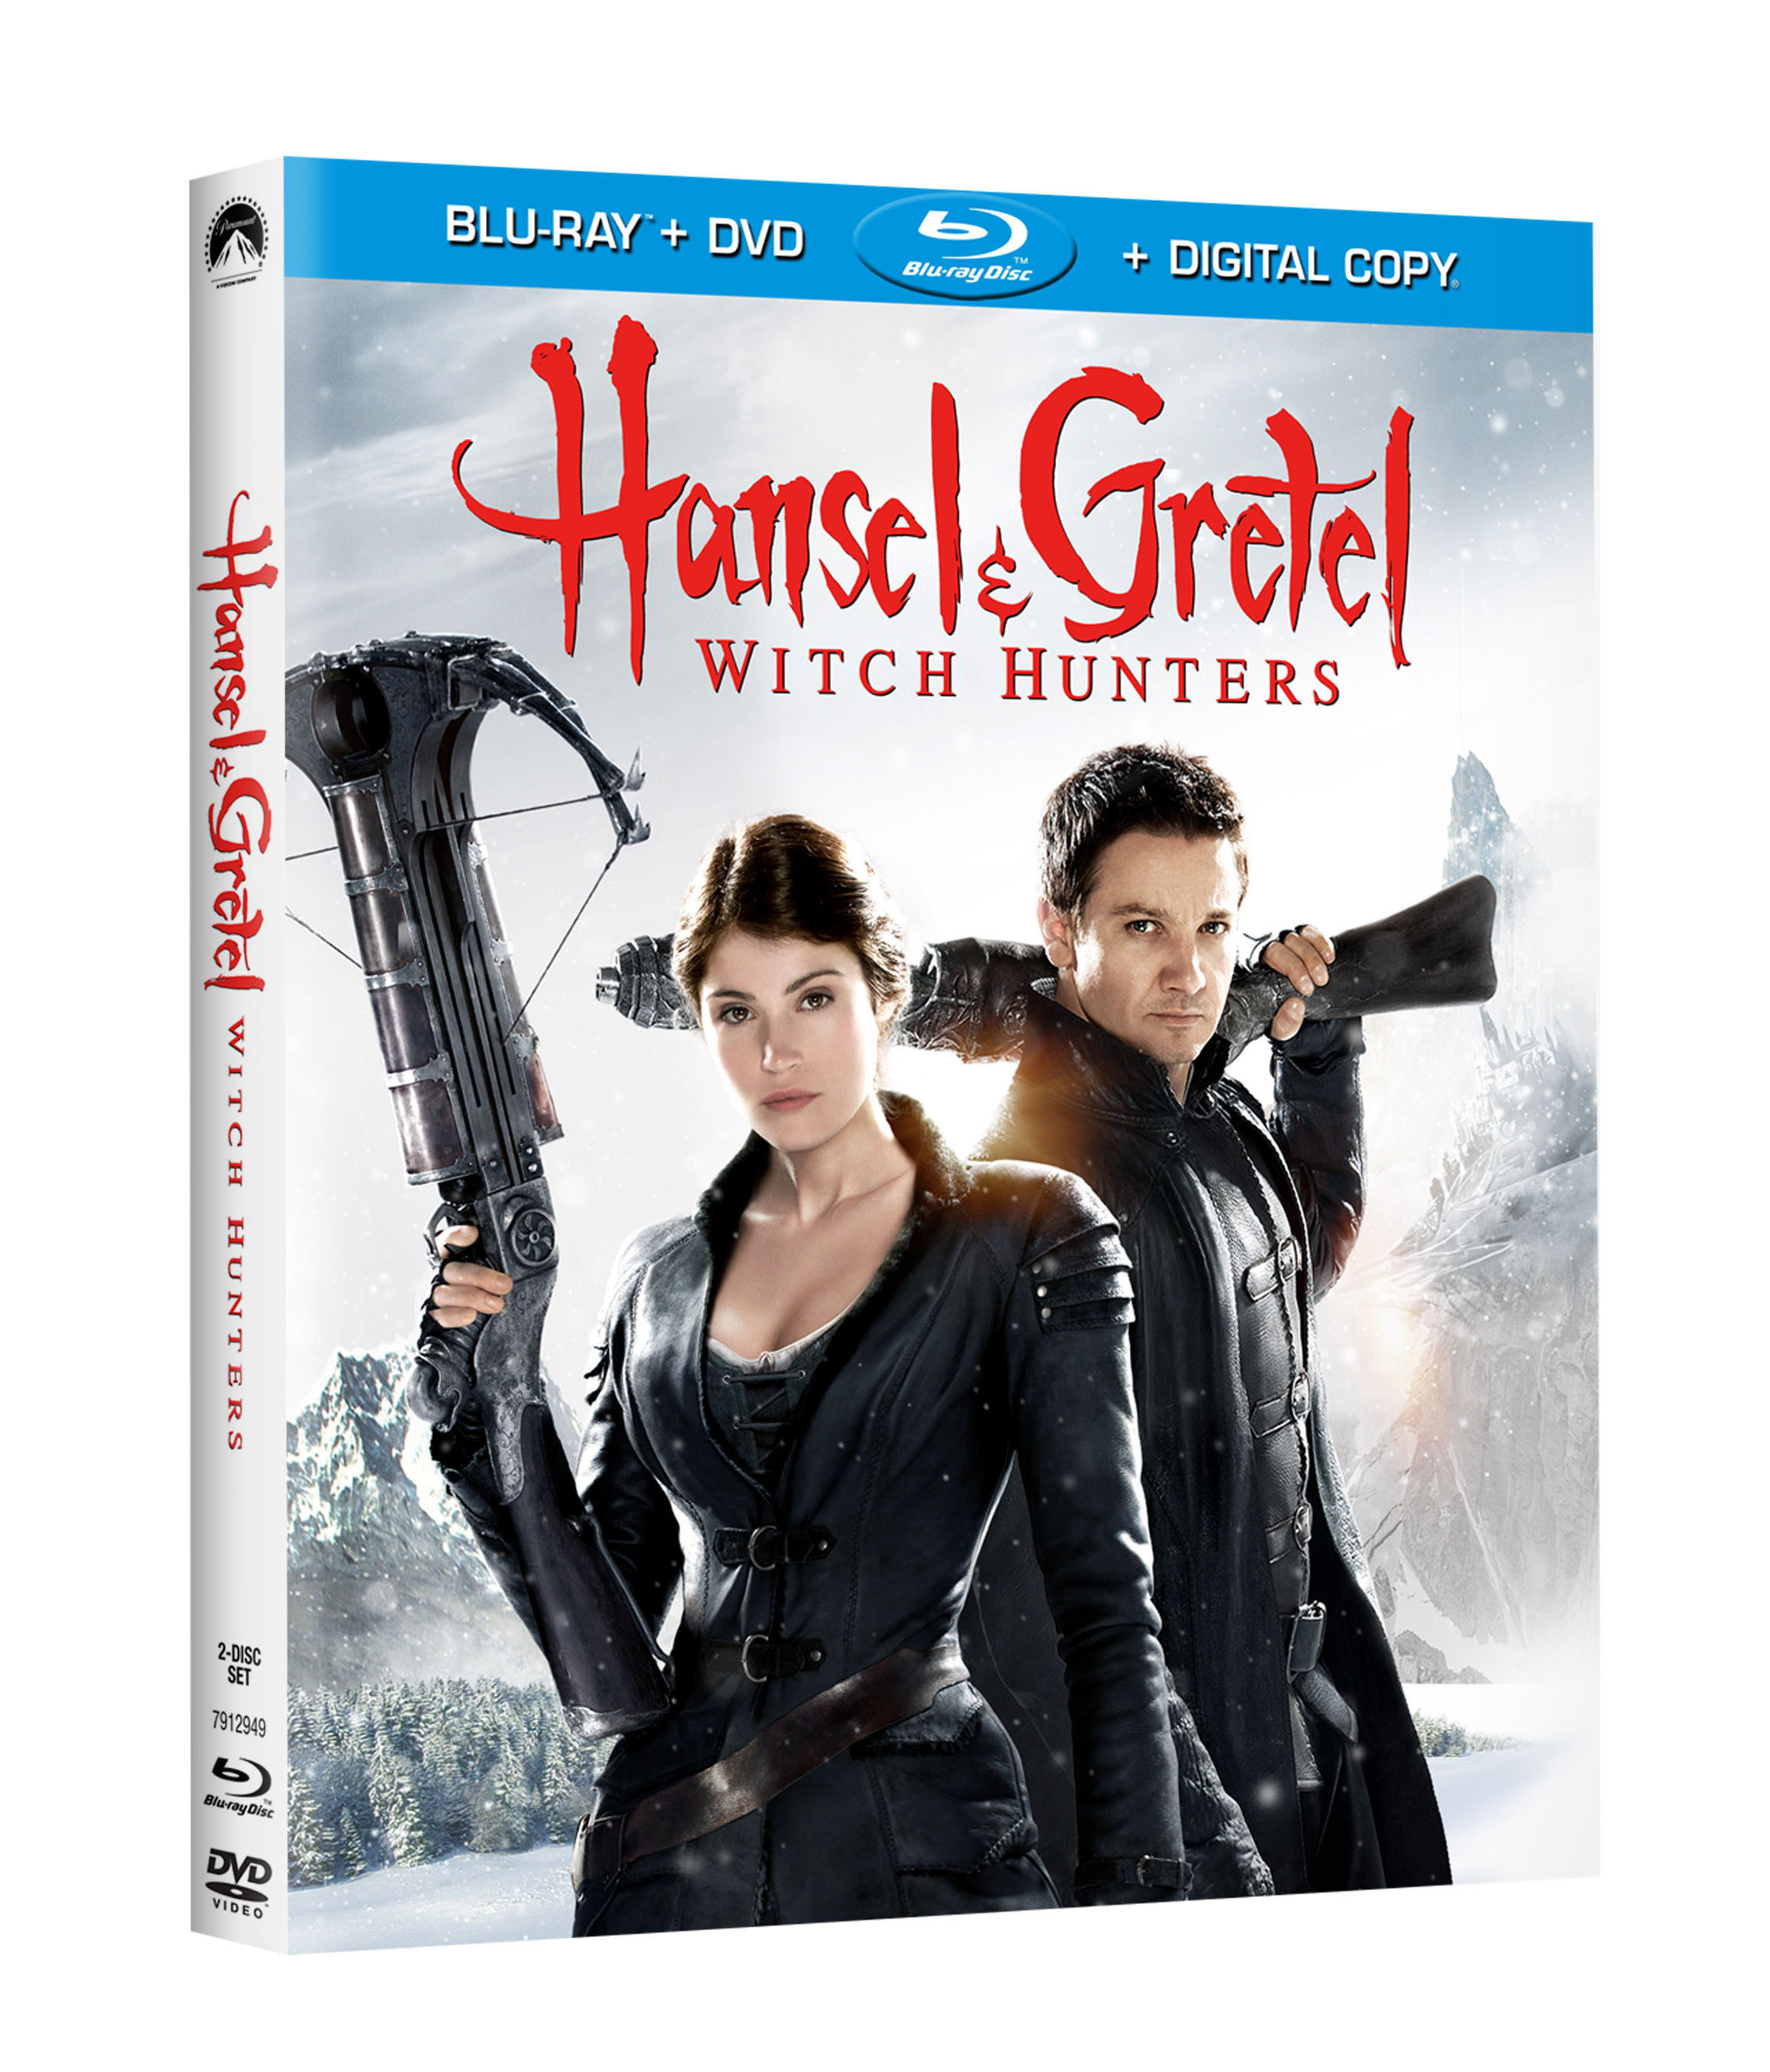 HANSEL & GRETEL: WITCH HUNTERS Comes To Blu-ray, Blu-ray 3D, DVD, On Demand June 11 ...2306 x 2700